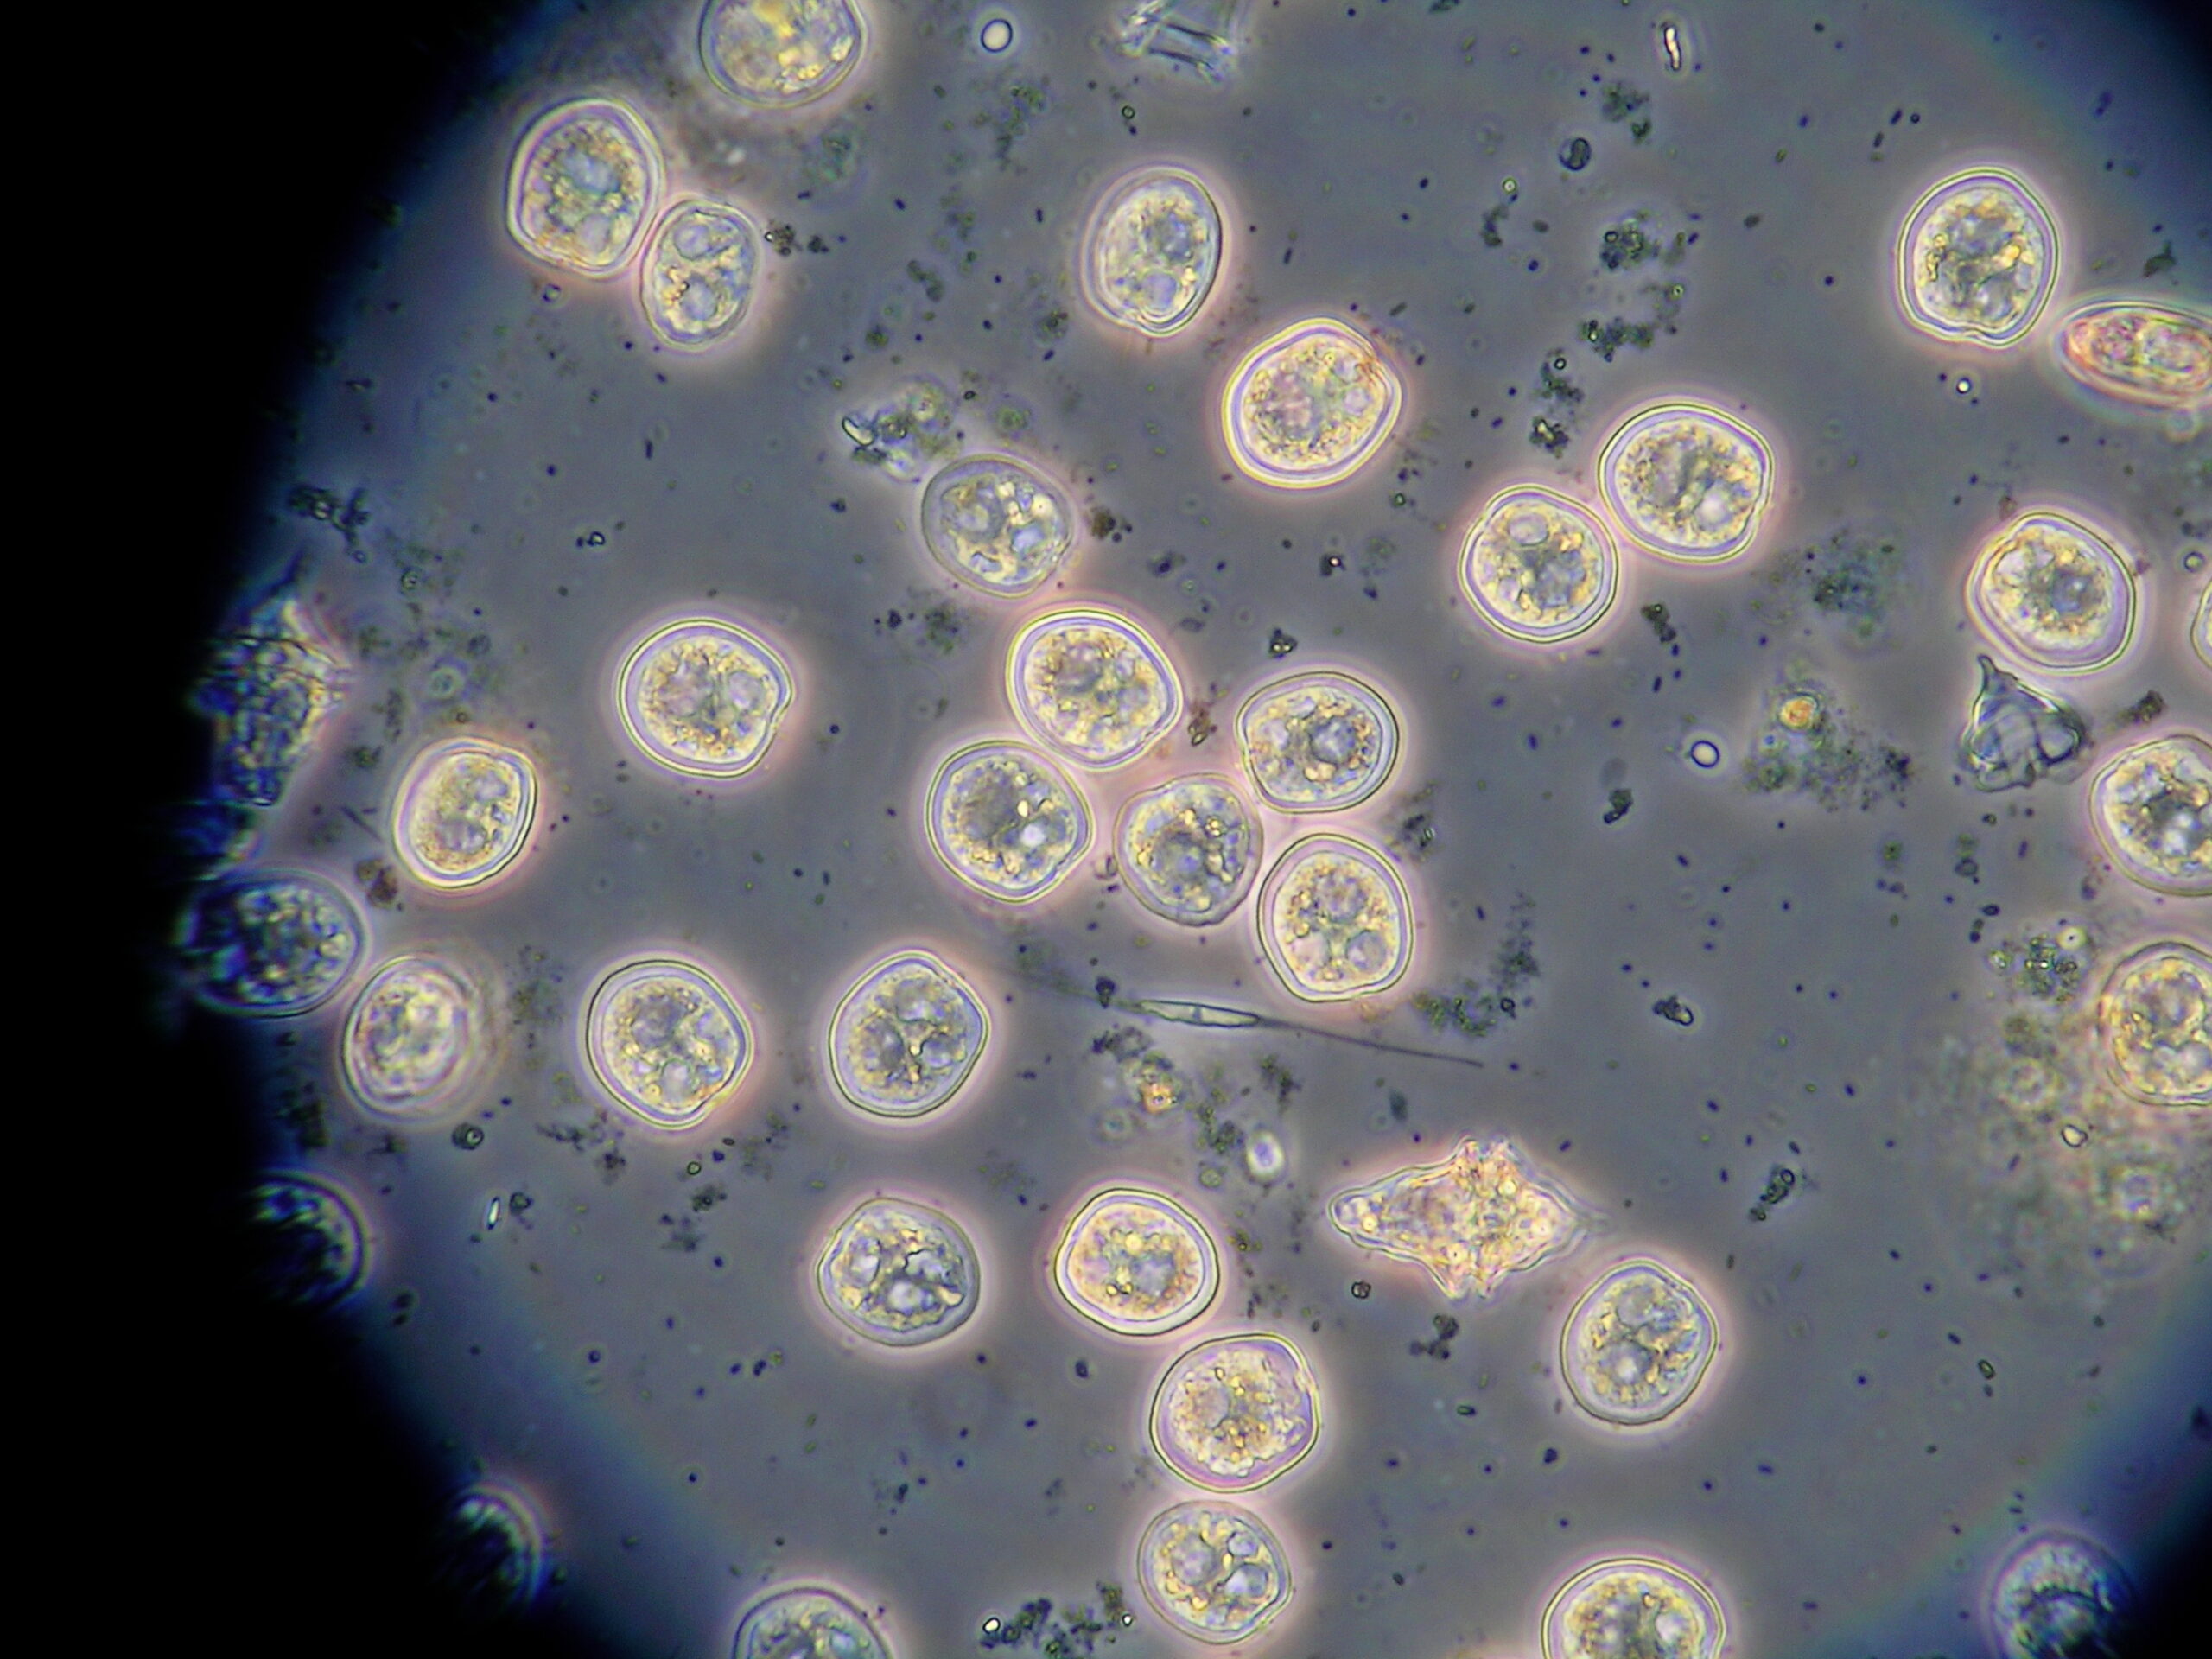 Phytoplankton diversity is linked to function, but how?